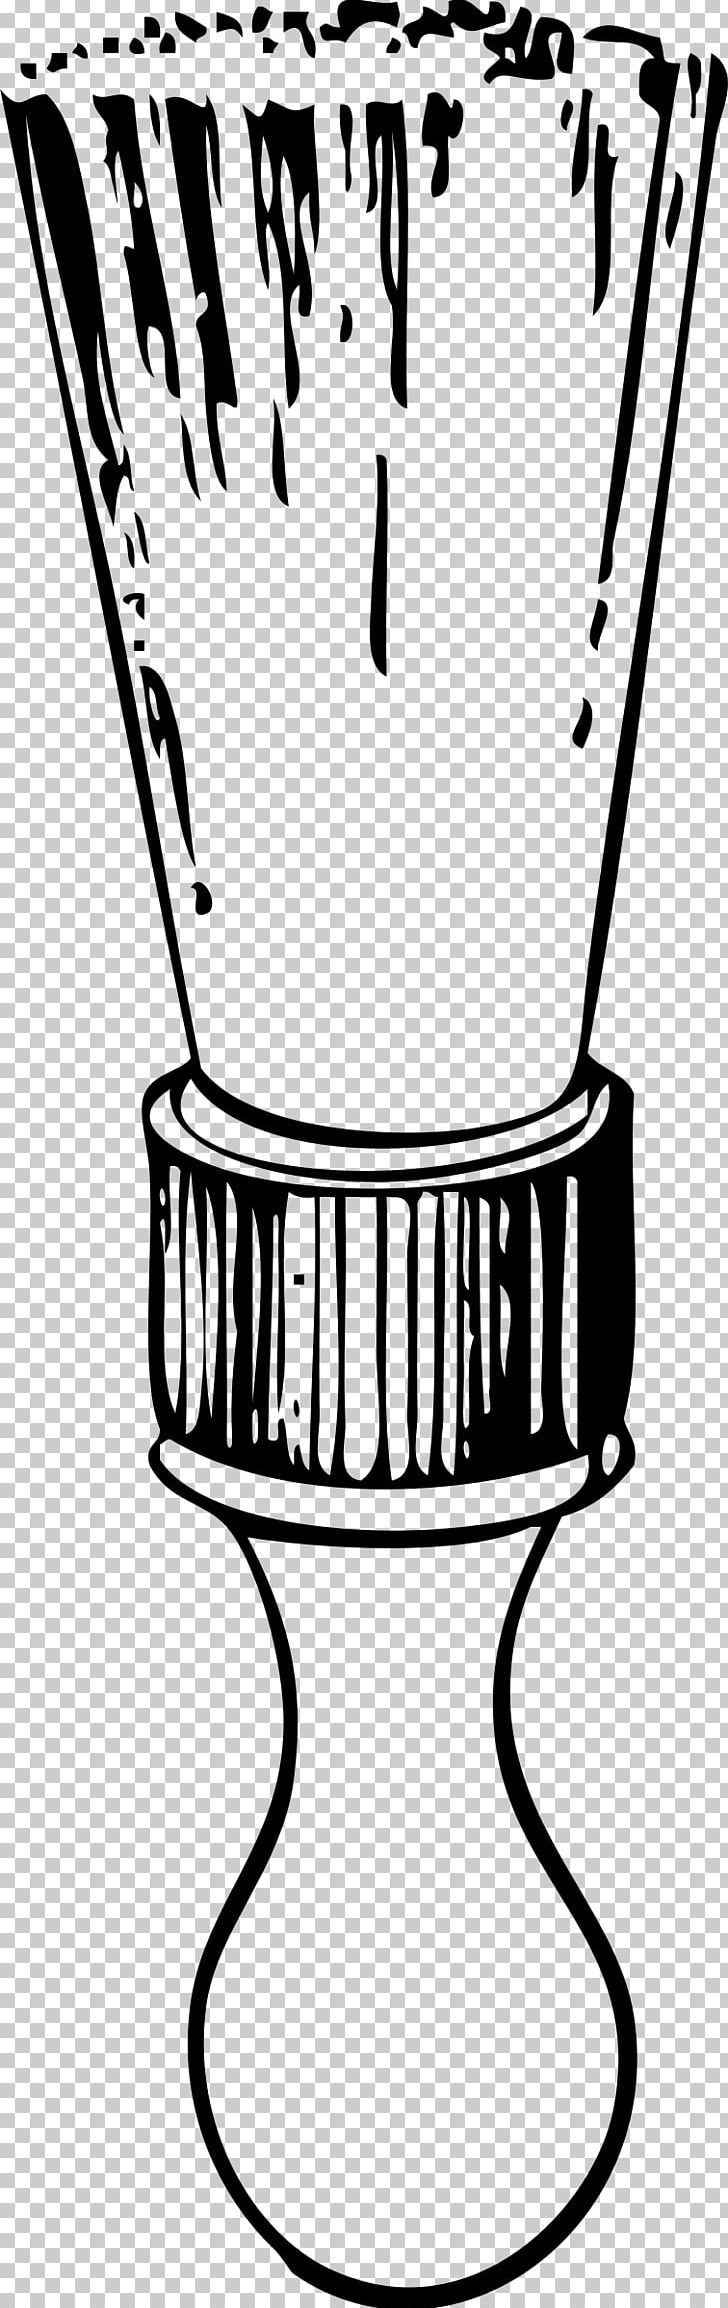 Comb Shave Brush Shaving PNG, Clipart, Area, Barber, Beard, Black, Black And White Free PNG Download